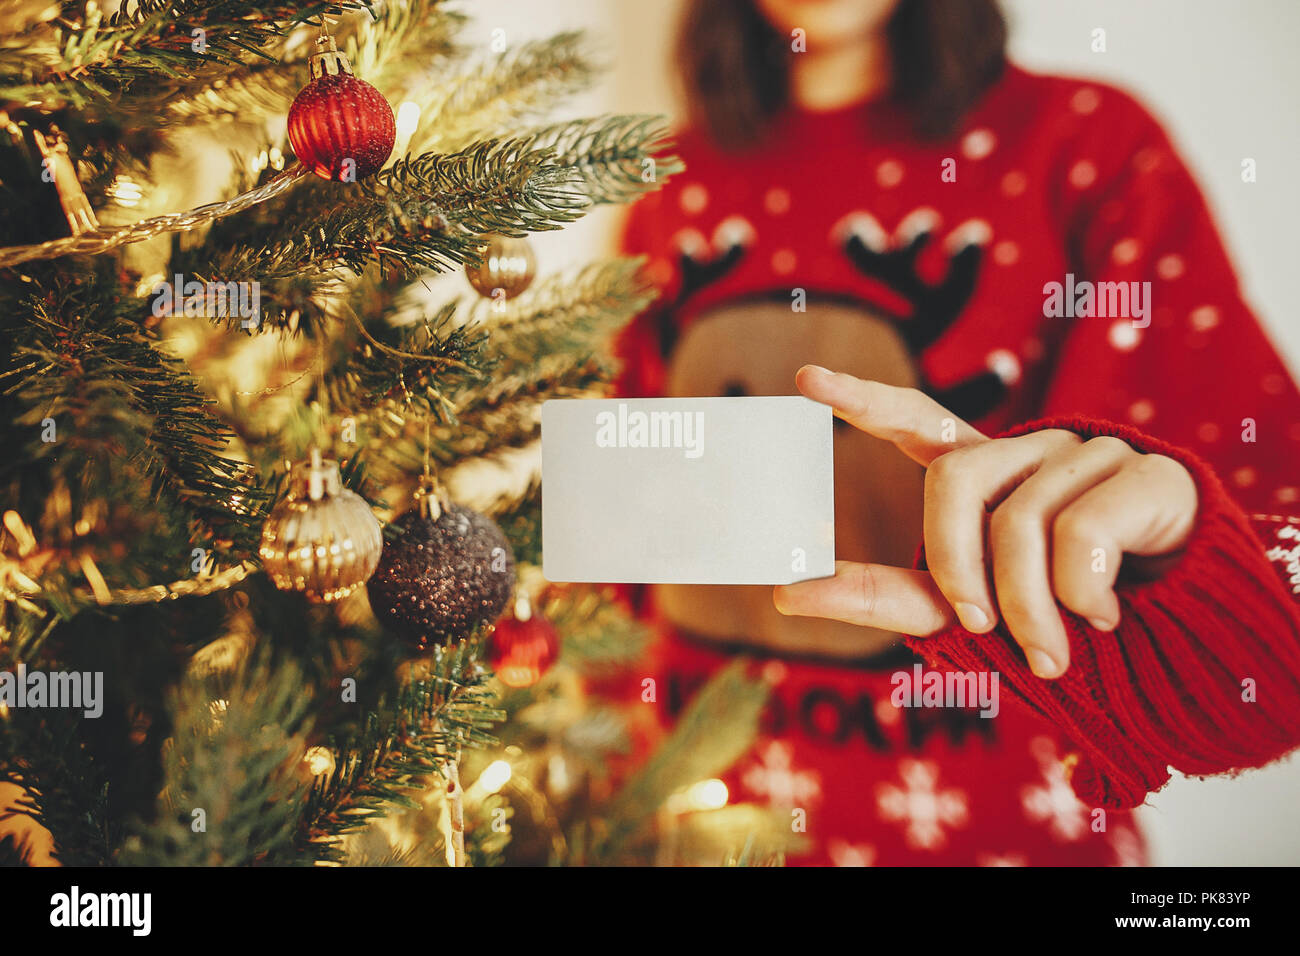 hand holding credit card close up on background of golden beautiful christmas tree with lights